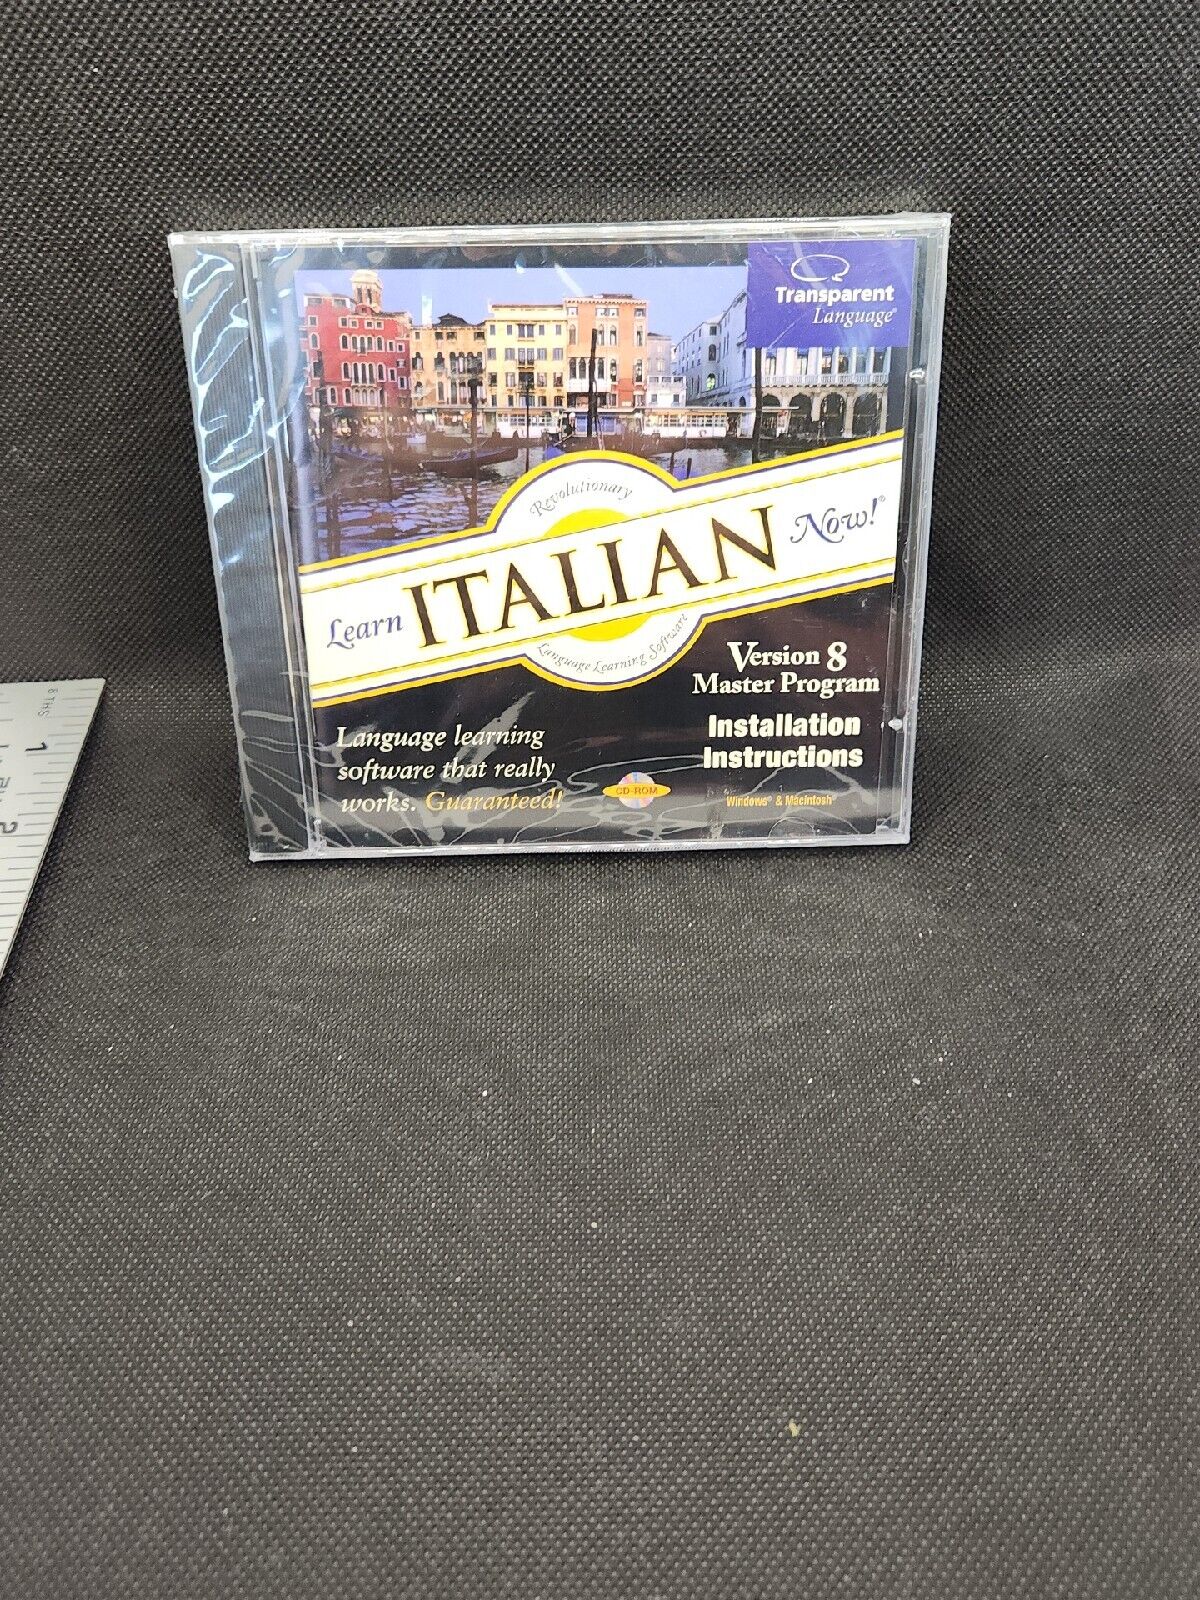 Learn Italian Now 8 PC CD-Rom Windows Educational Language Learning Software NEW